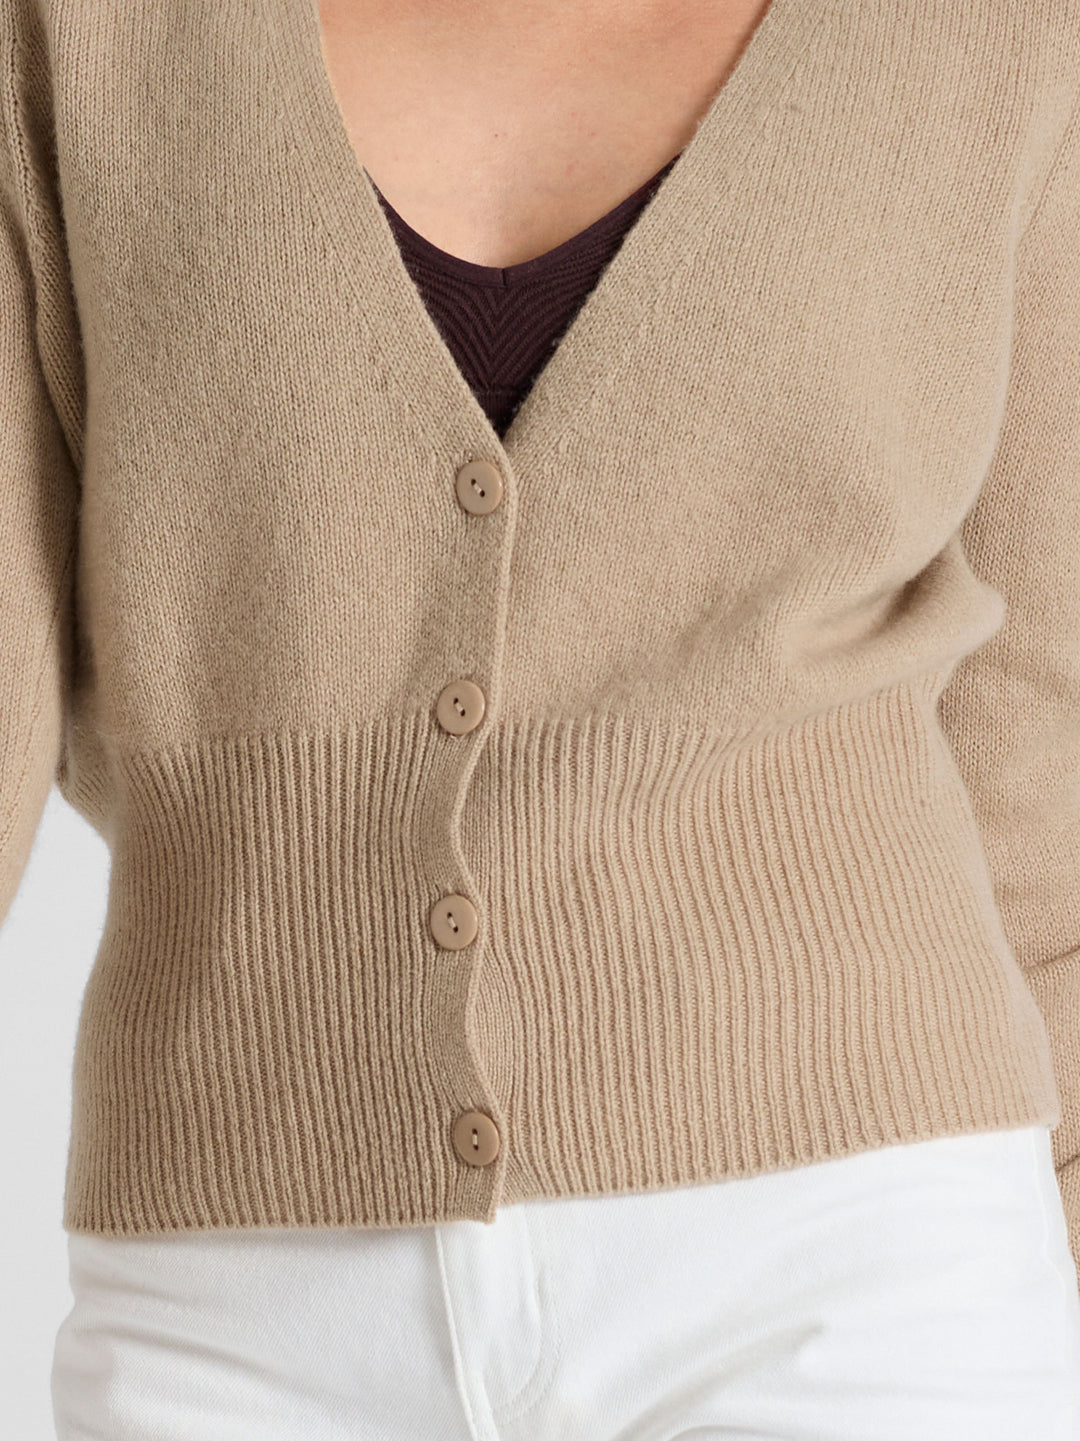 Cashmere cardigan puff sleeves, long sleeves, 100% pure cashmere, Scandinavian design, color: Sand.